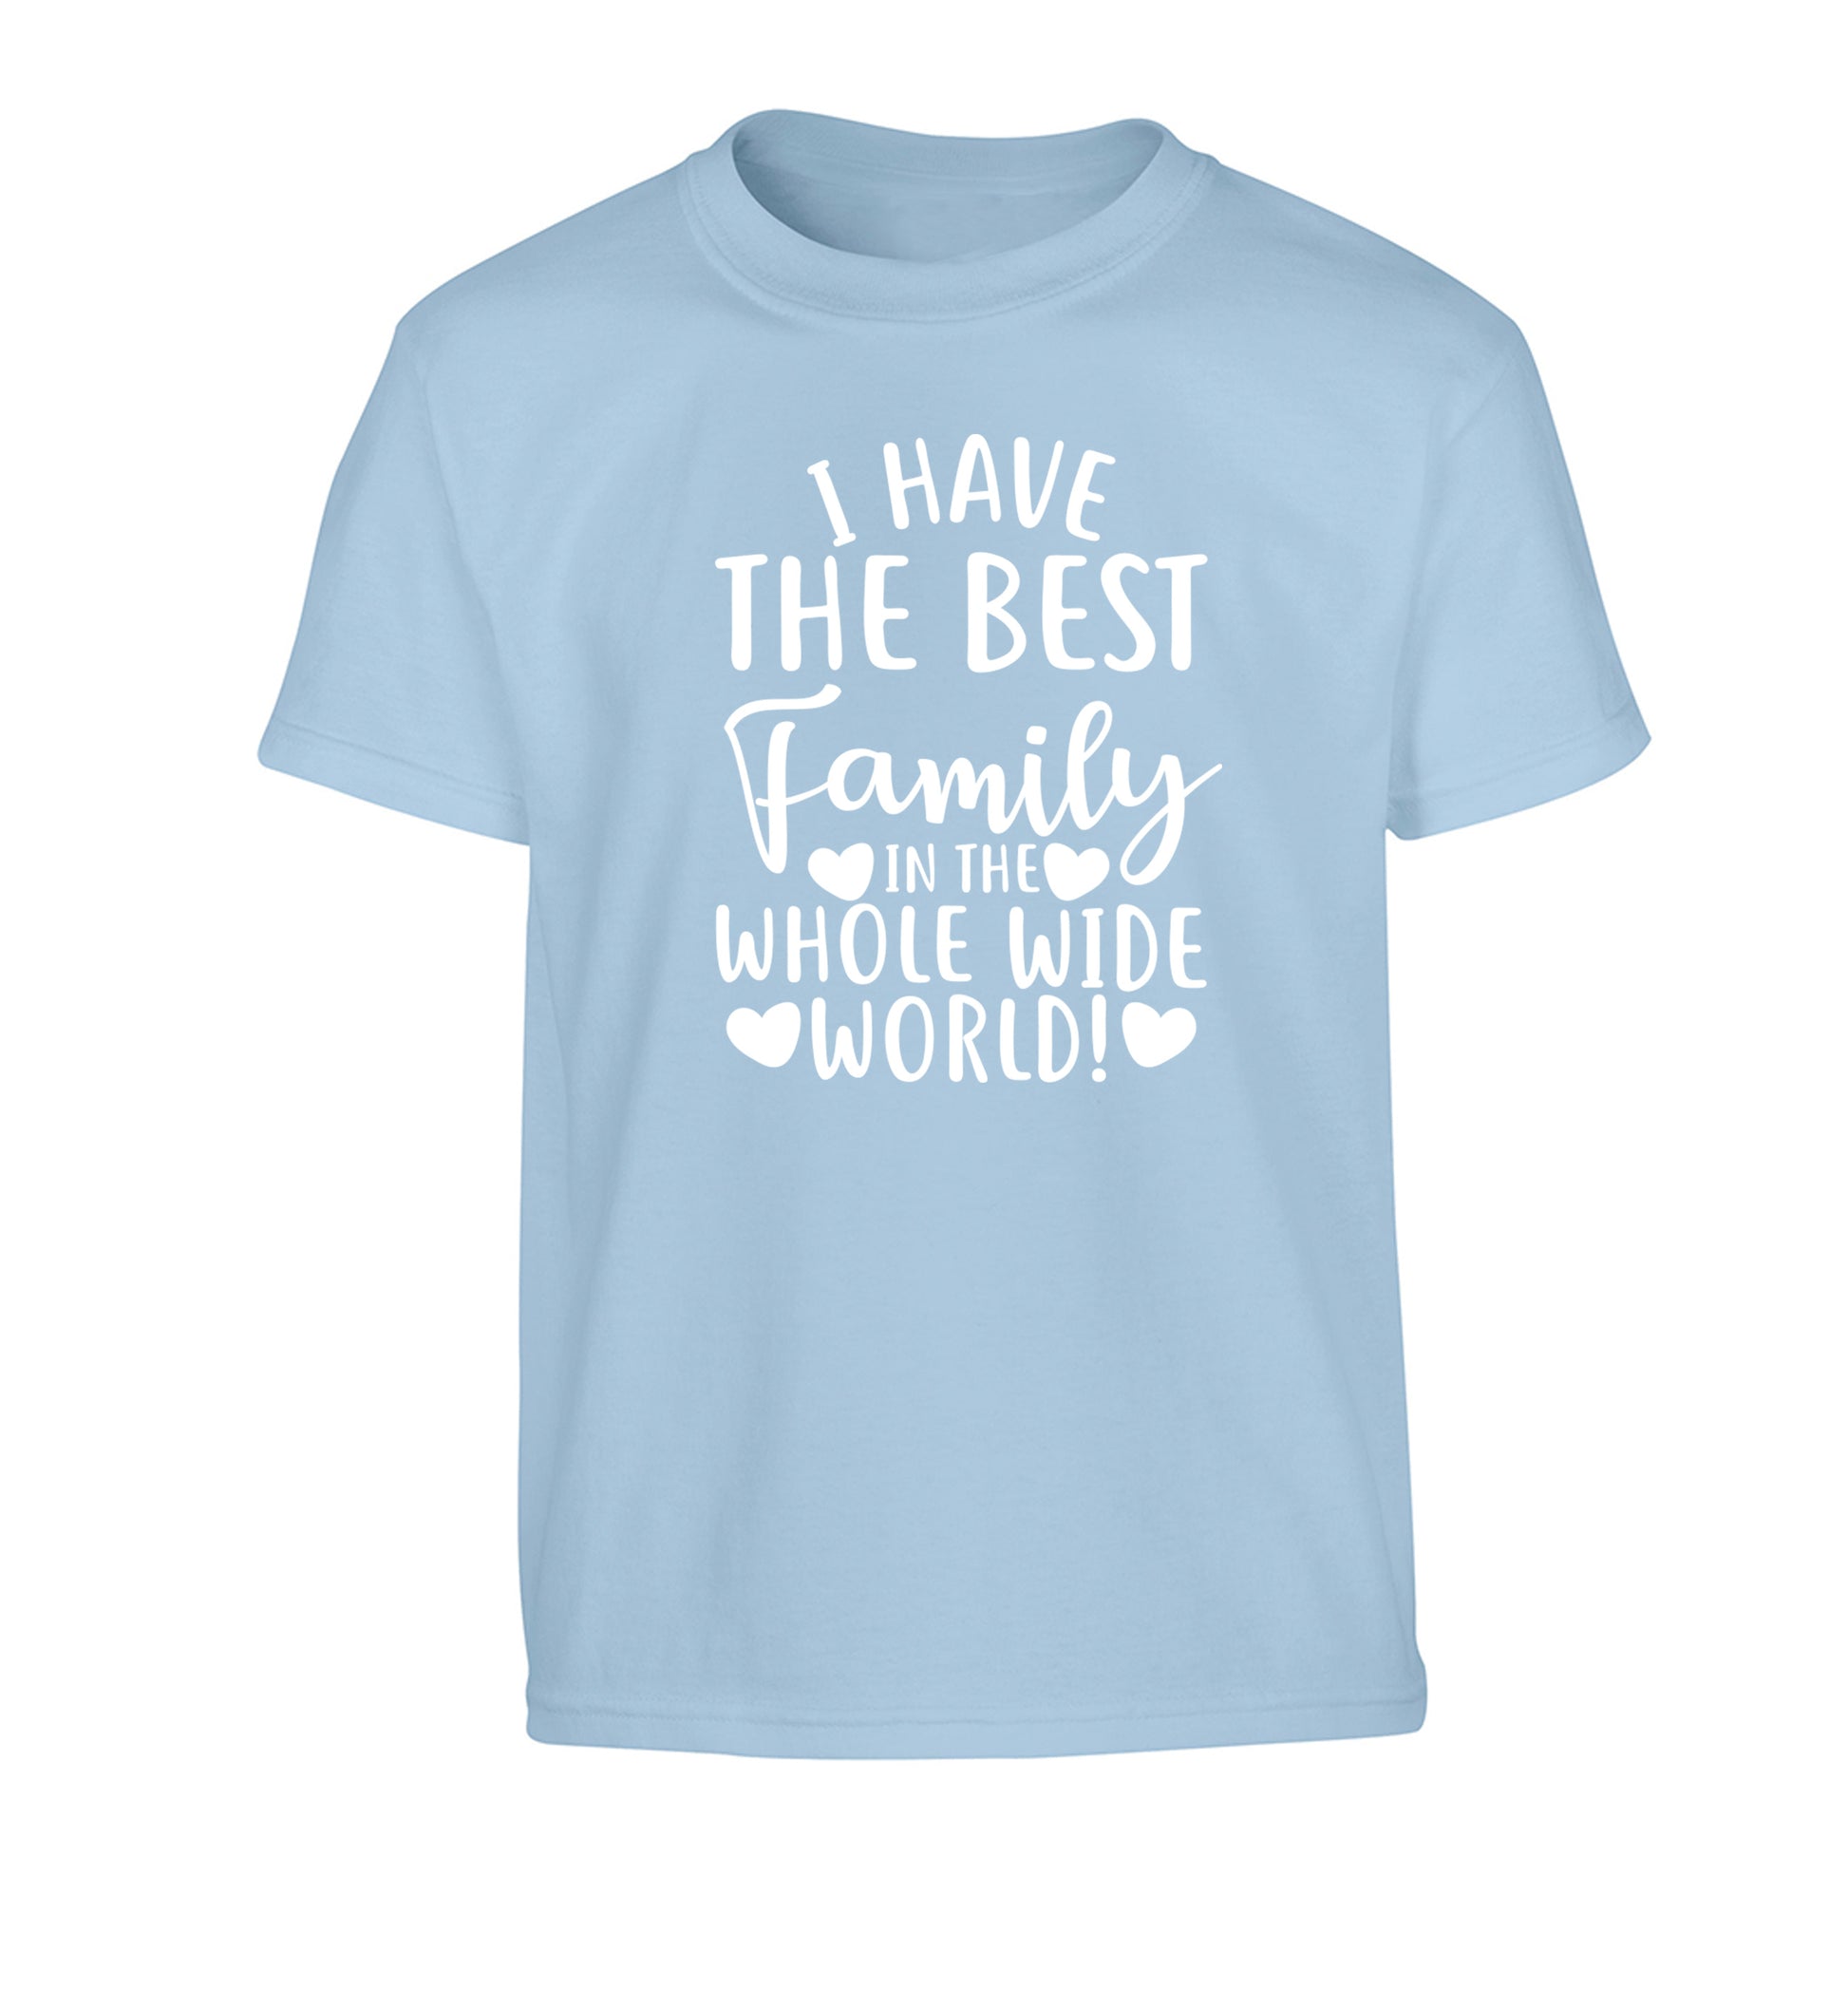 I have the best family in the whole wide world! Children's light blue Tshirt 12-13 Years